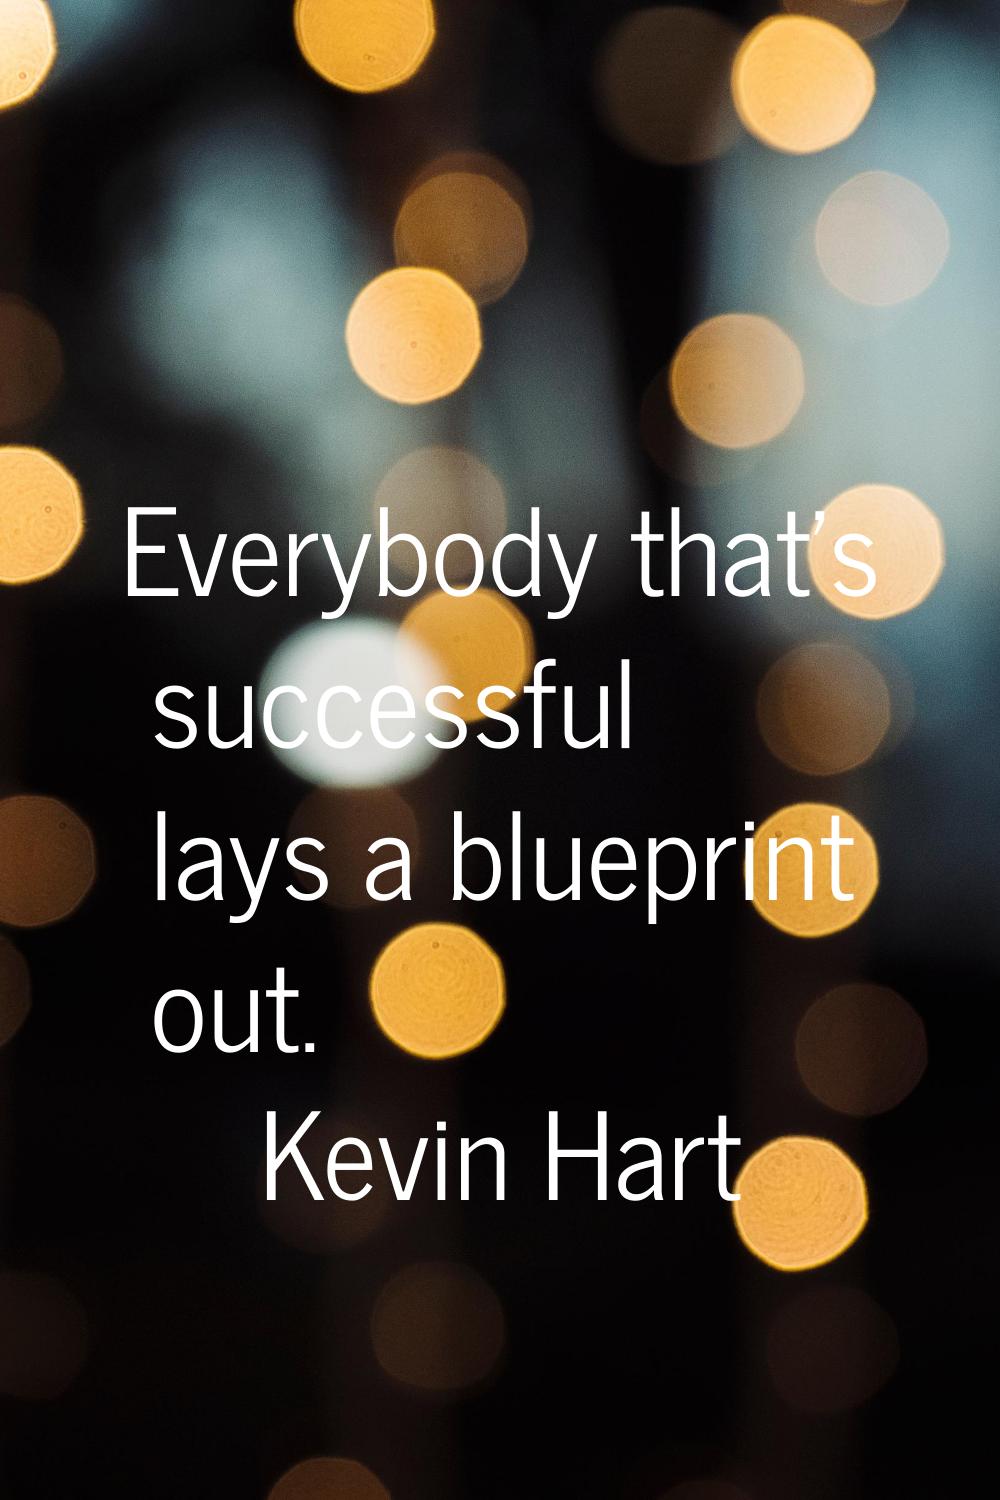 Everybody that's successful lays a blueprint out.